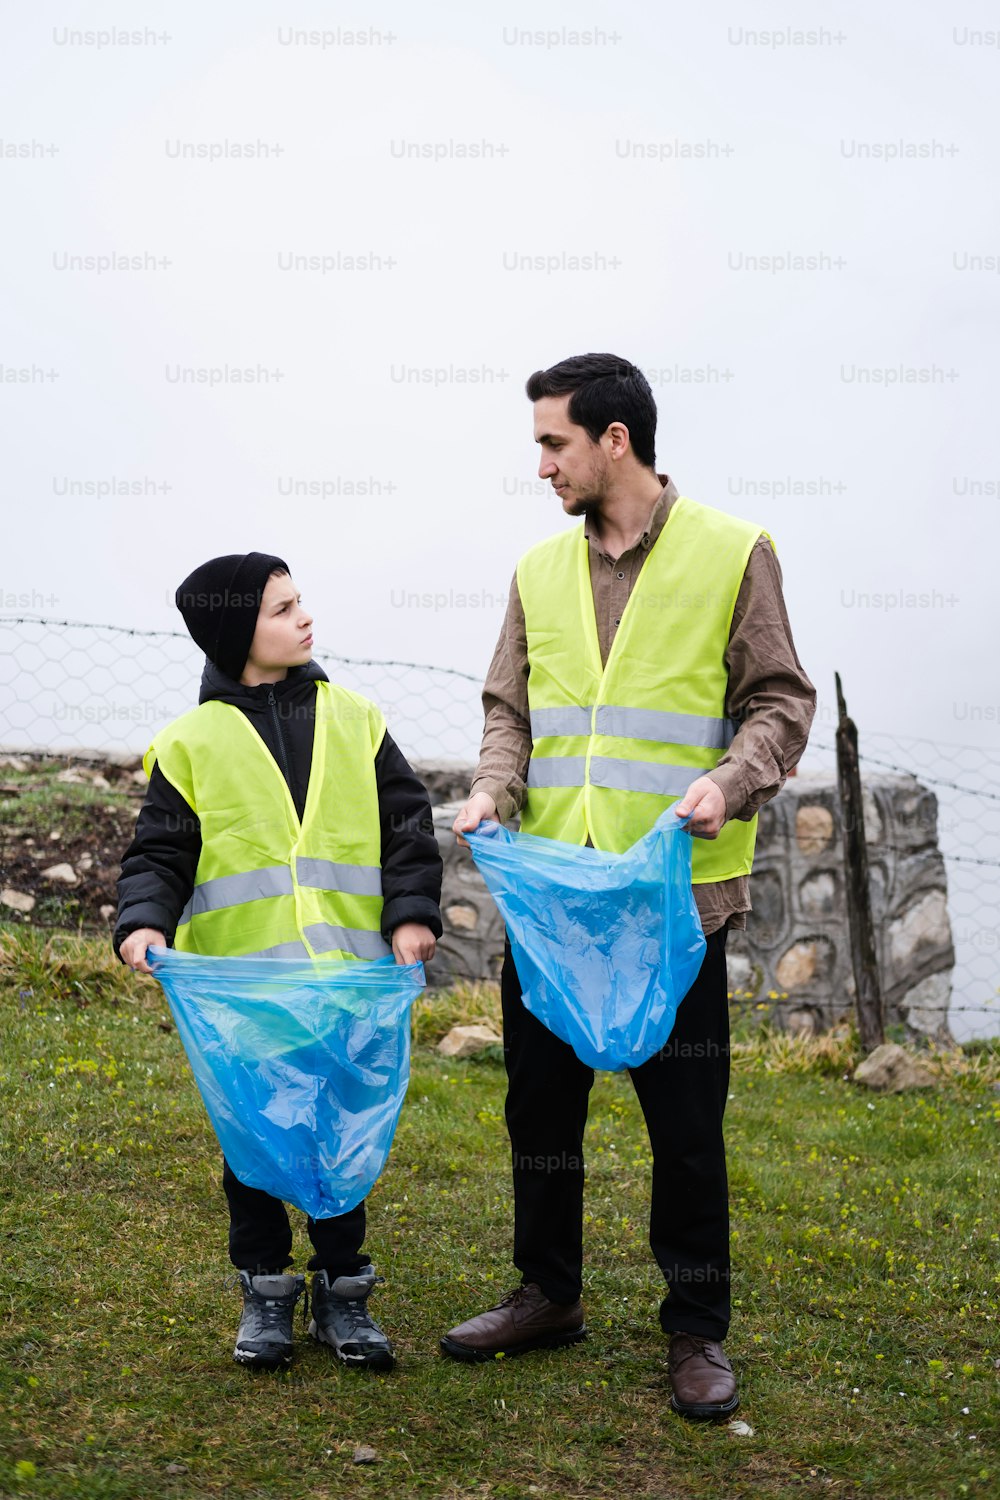 a man and a woman wearing safety vests